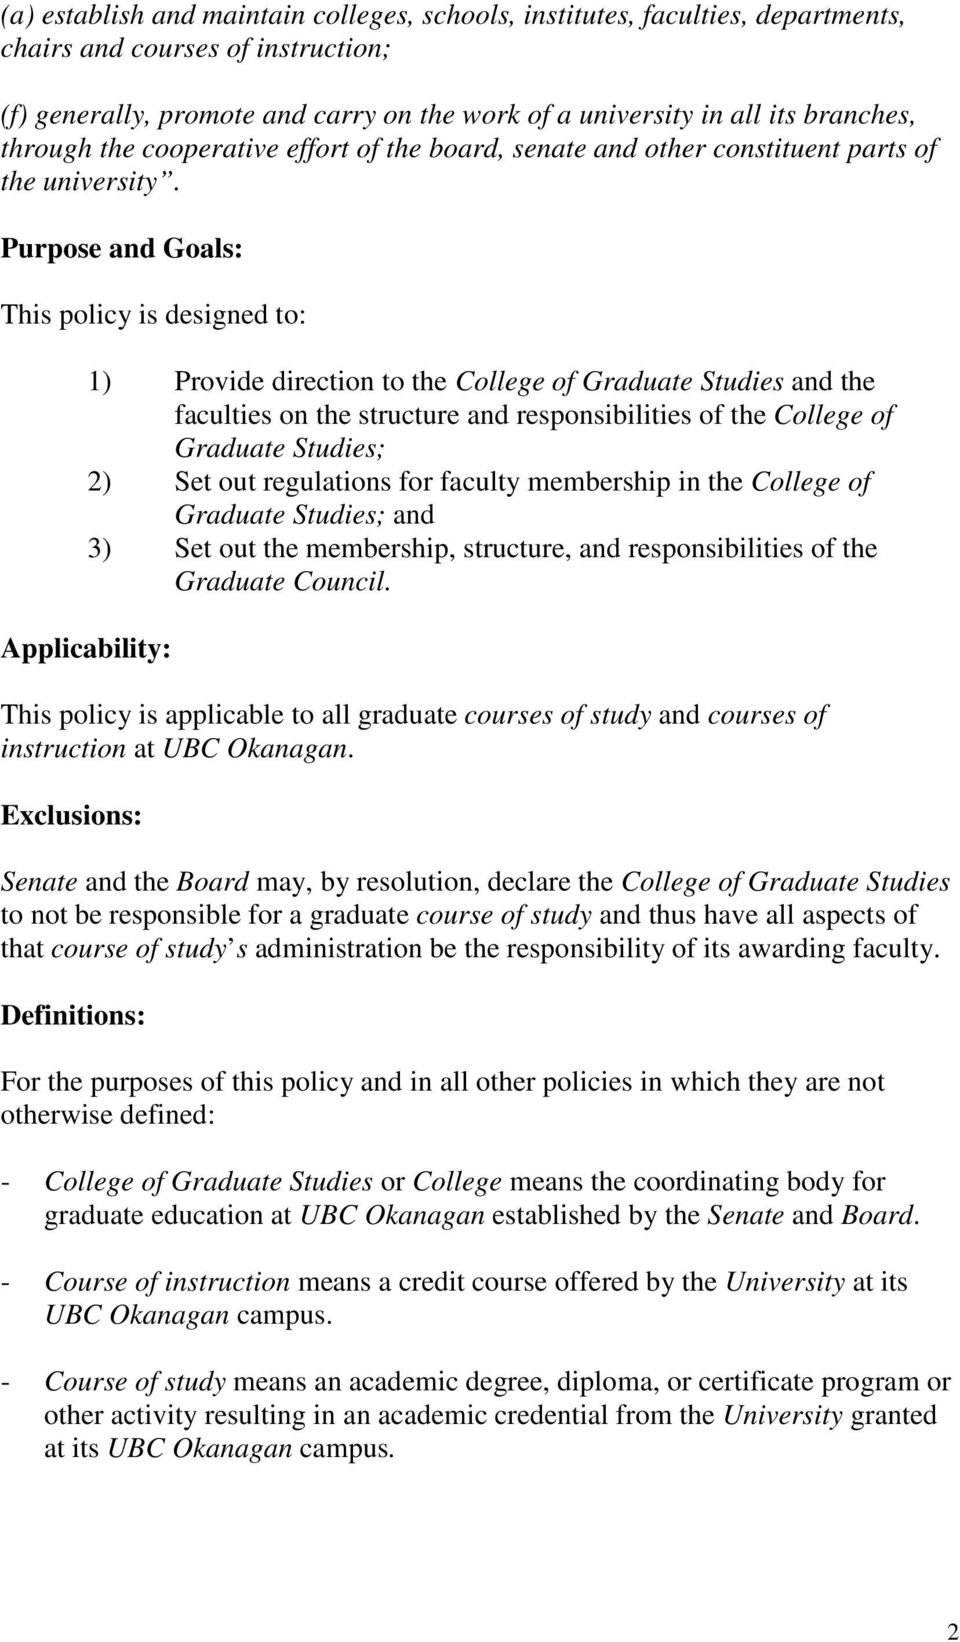 Purpose and Goals: This policy is designed to: 1) Provide direction to the College of Graduate Studies and the faculties on the structure and responsibilities of the College of Graduate Studies; 2)